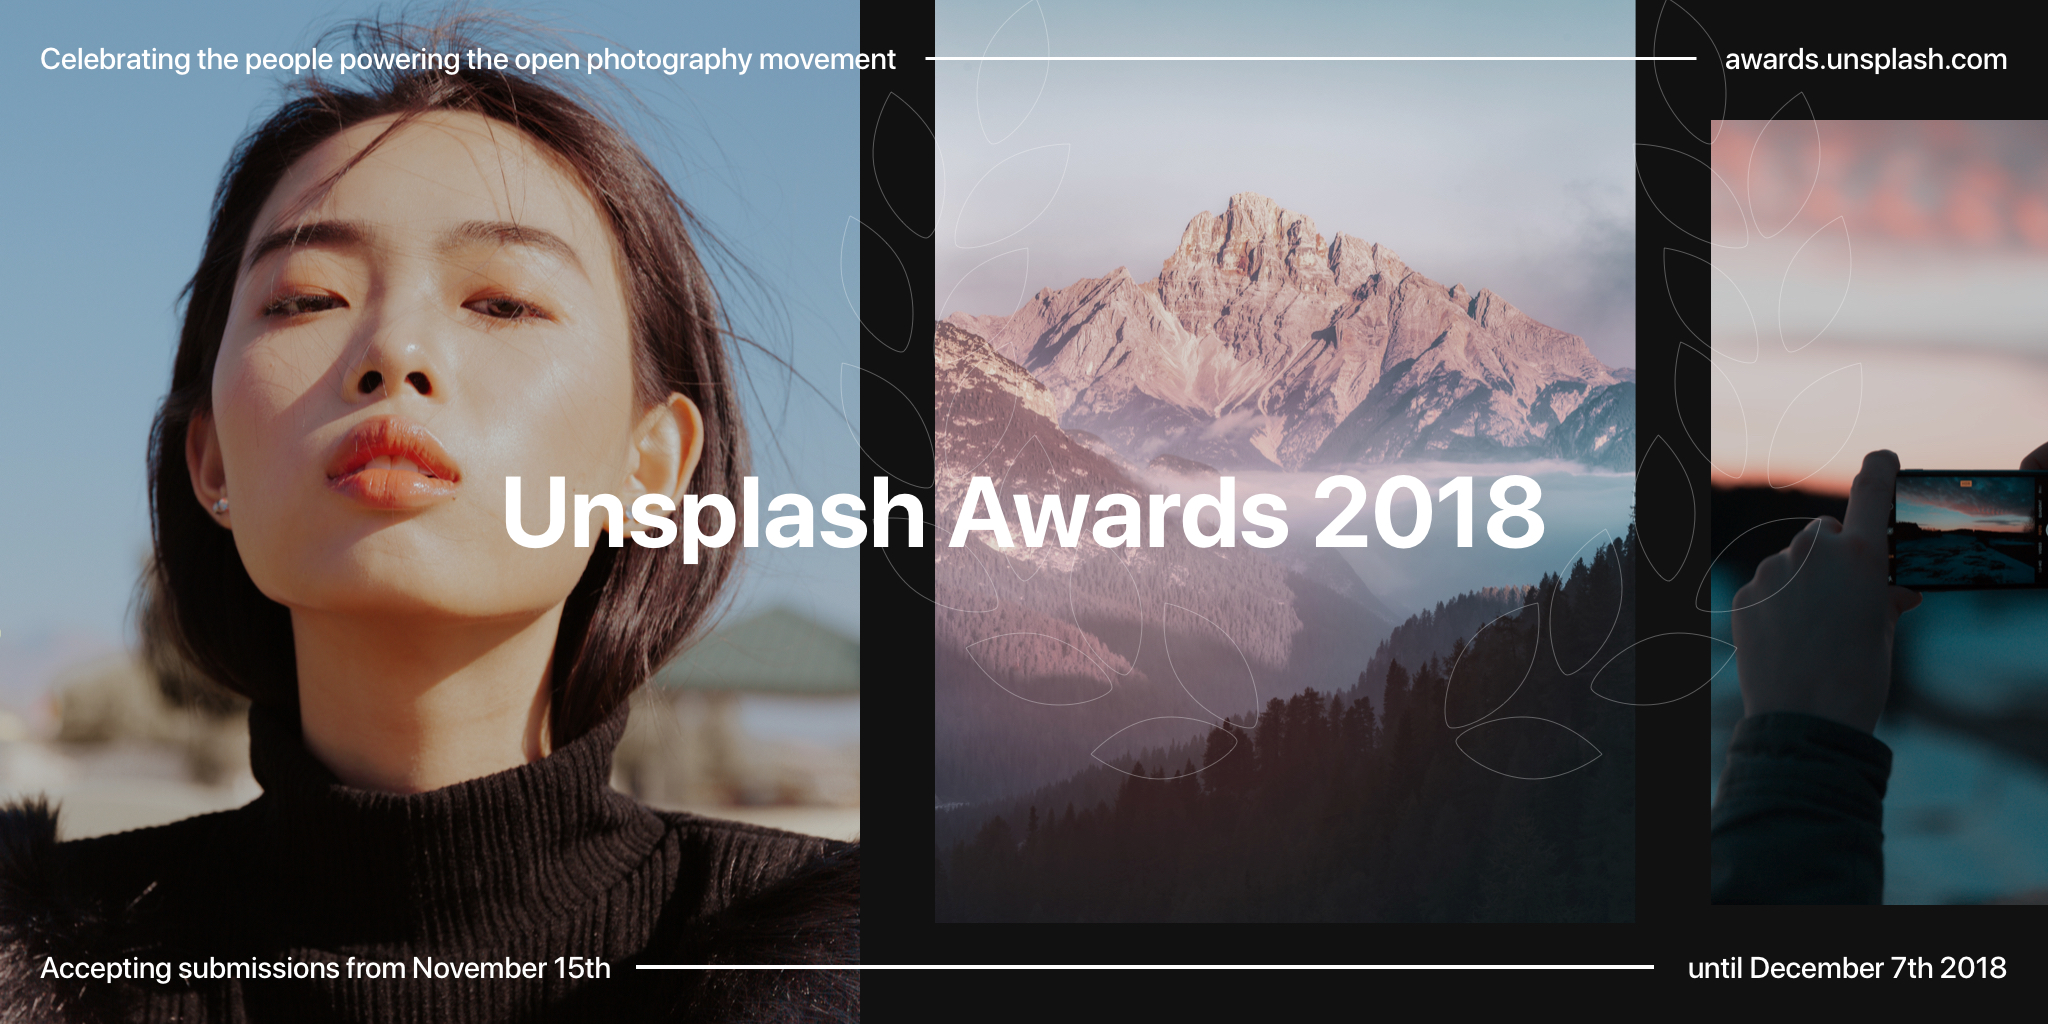 Introducing the #UnsplashAwards 2018 - Open Submissions